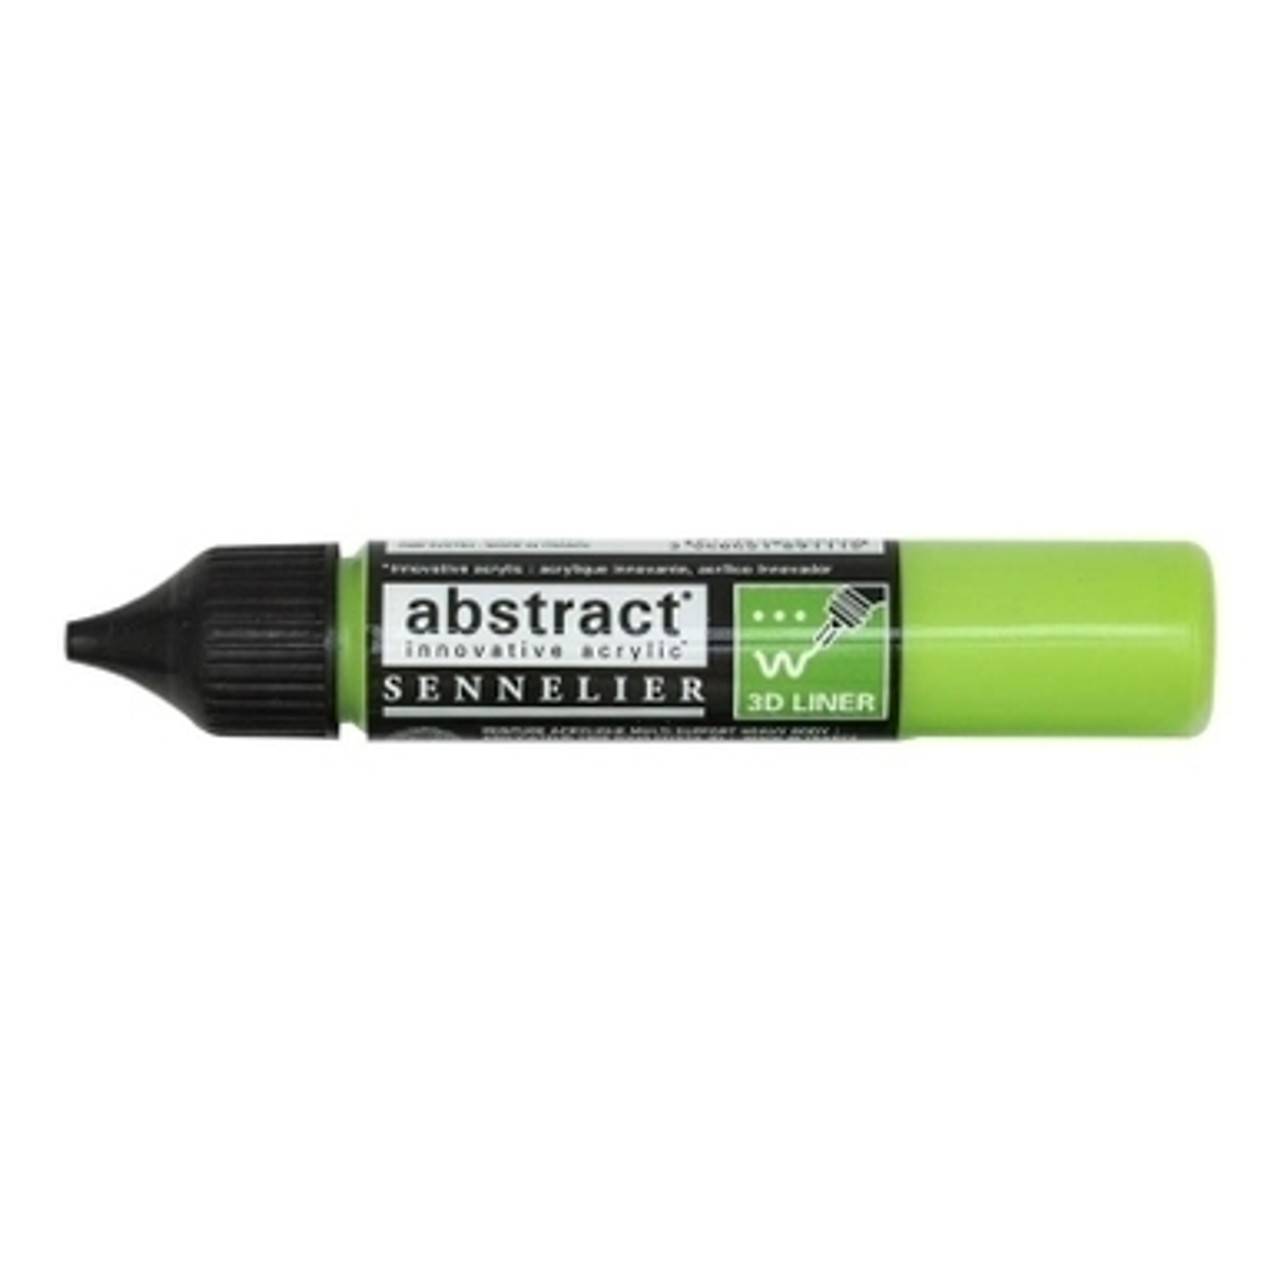 Sennelier Abstract Liner Bright Yellow Green